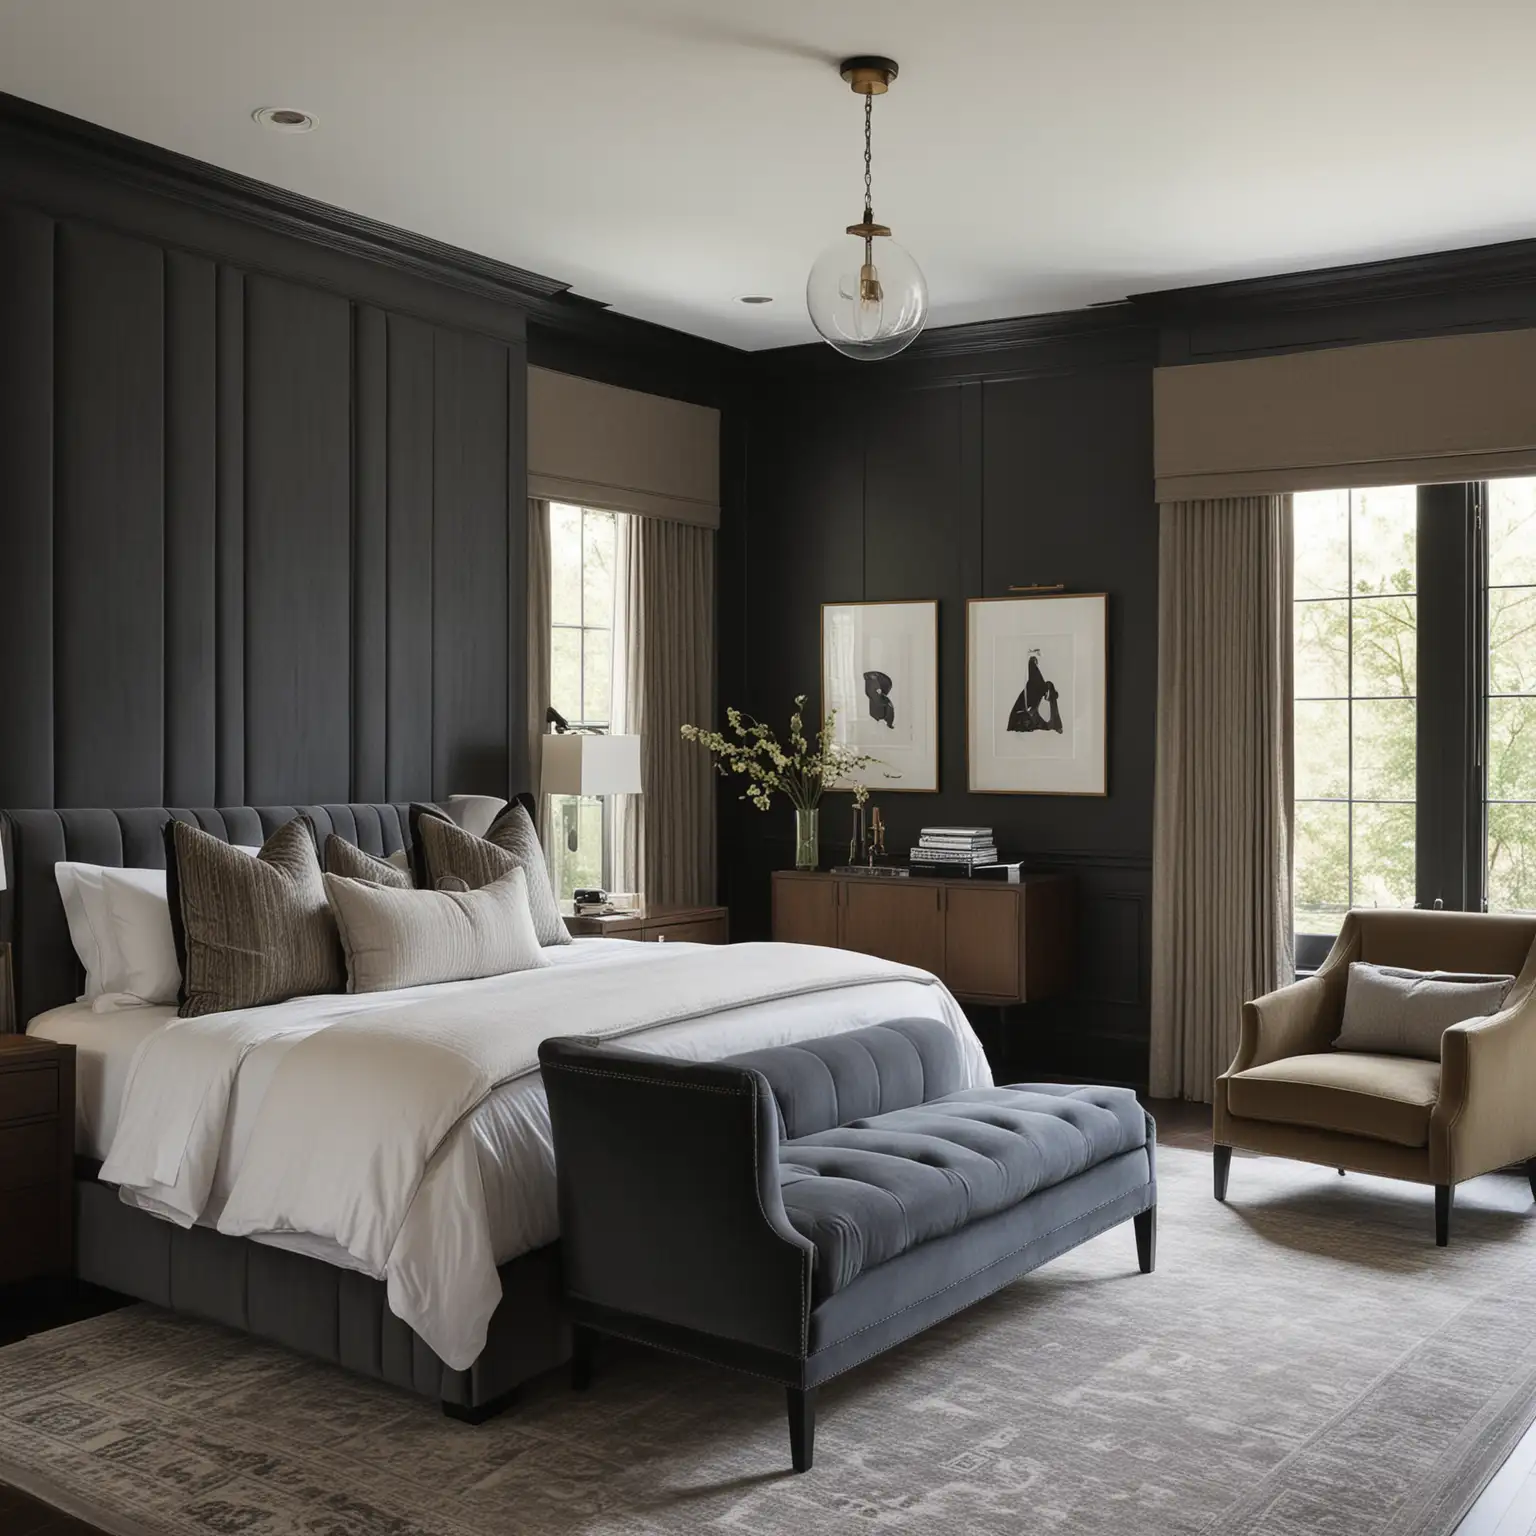 Luxurious Modern Bedroom with Moody Paneled Walls and Upholstered Furniture